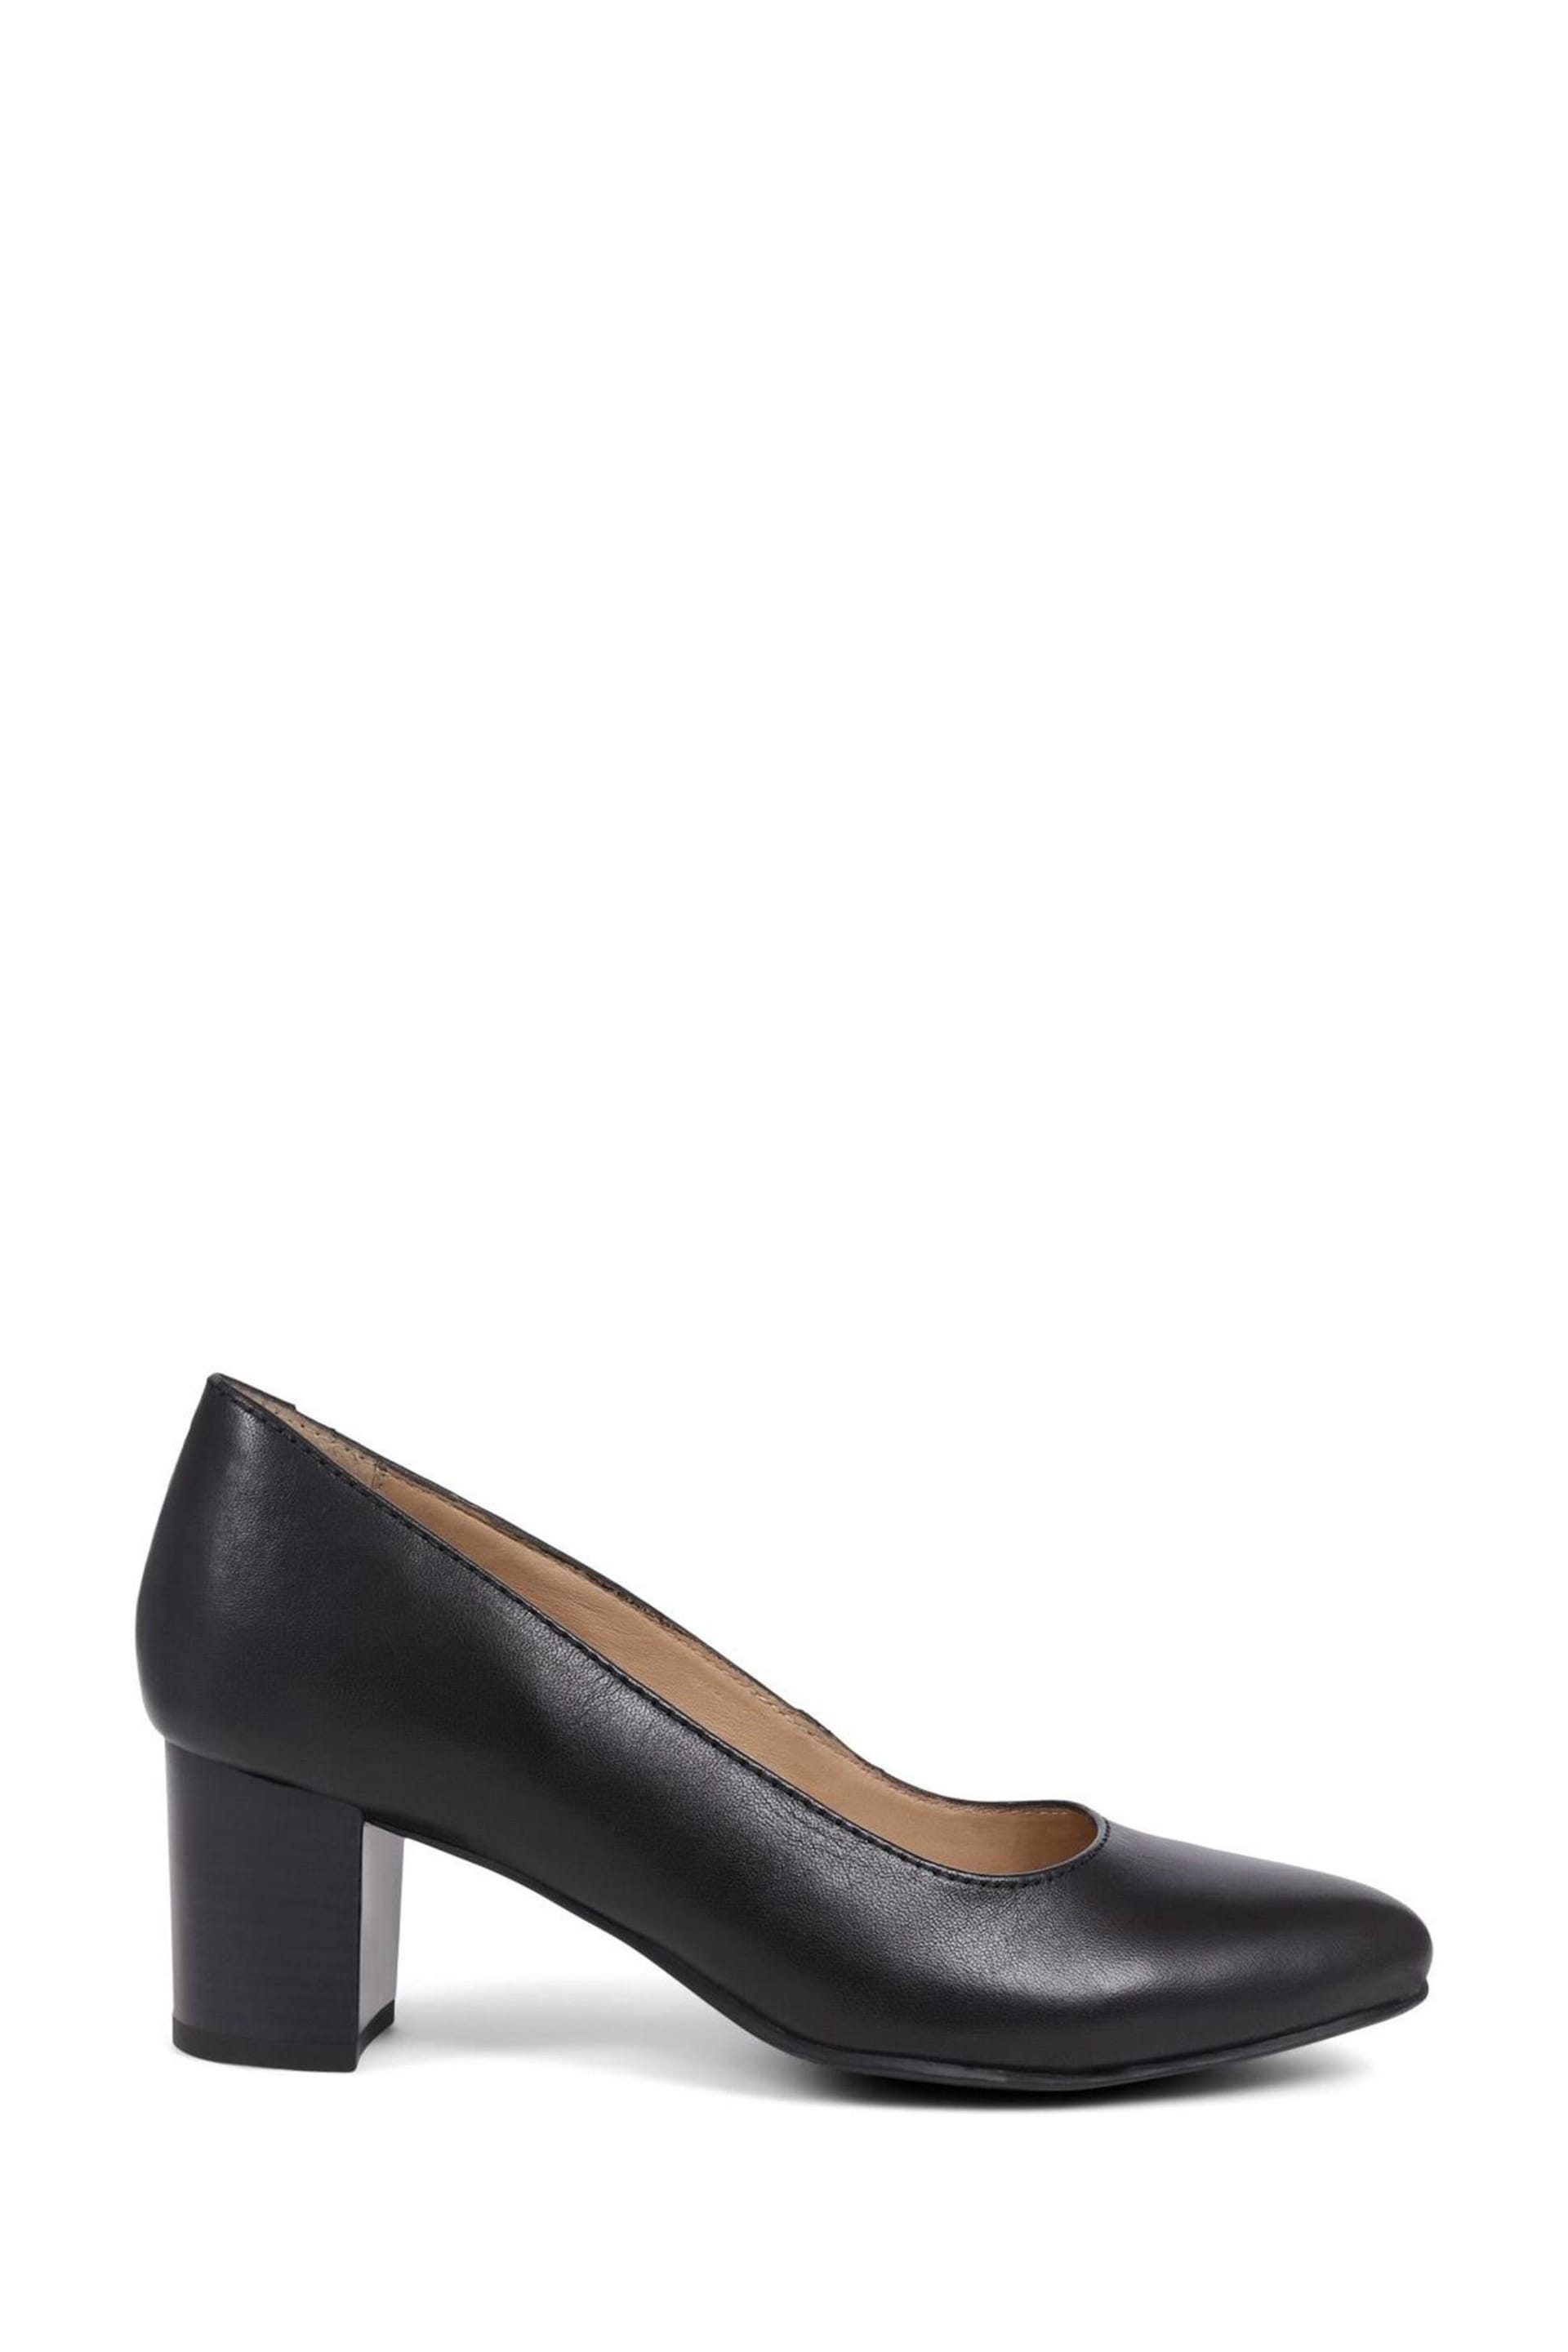 Pavers Black Pavers Heeled Leather Court Shoes - Image 1 of 5